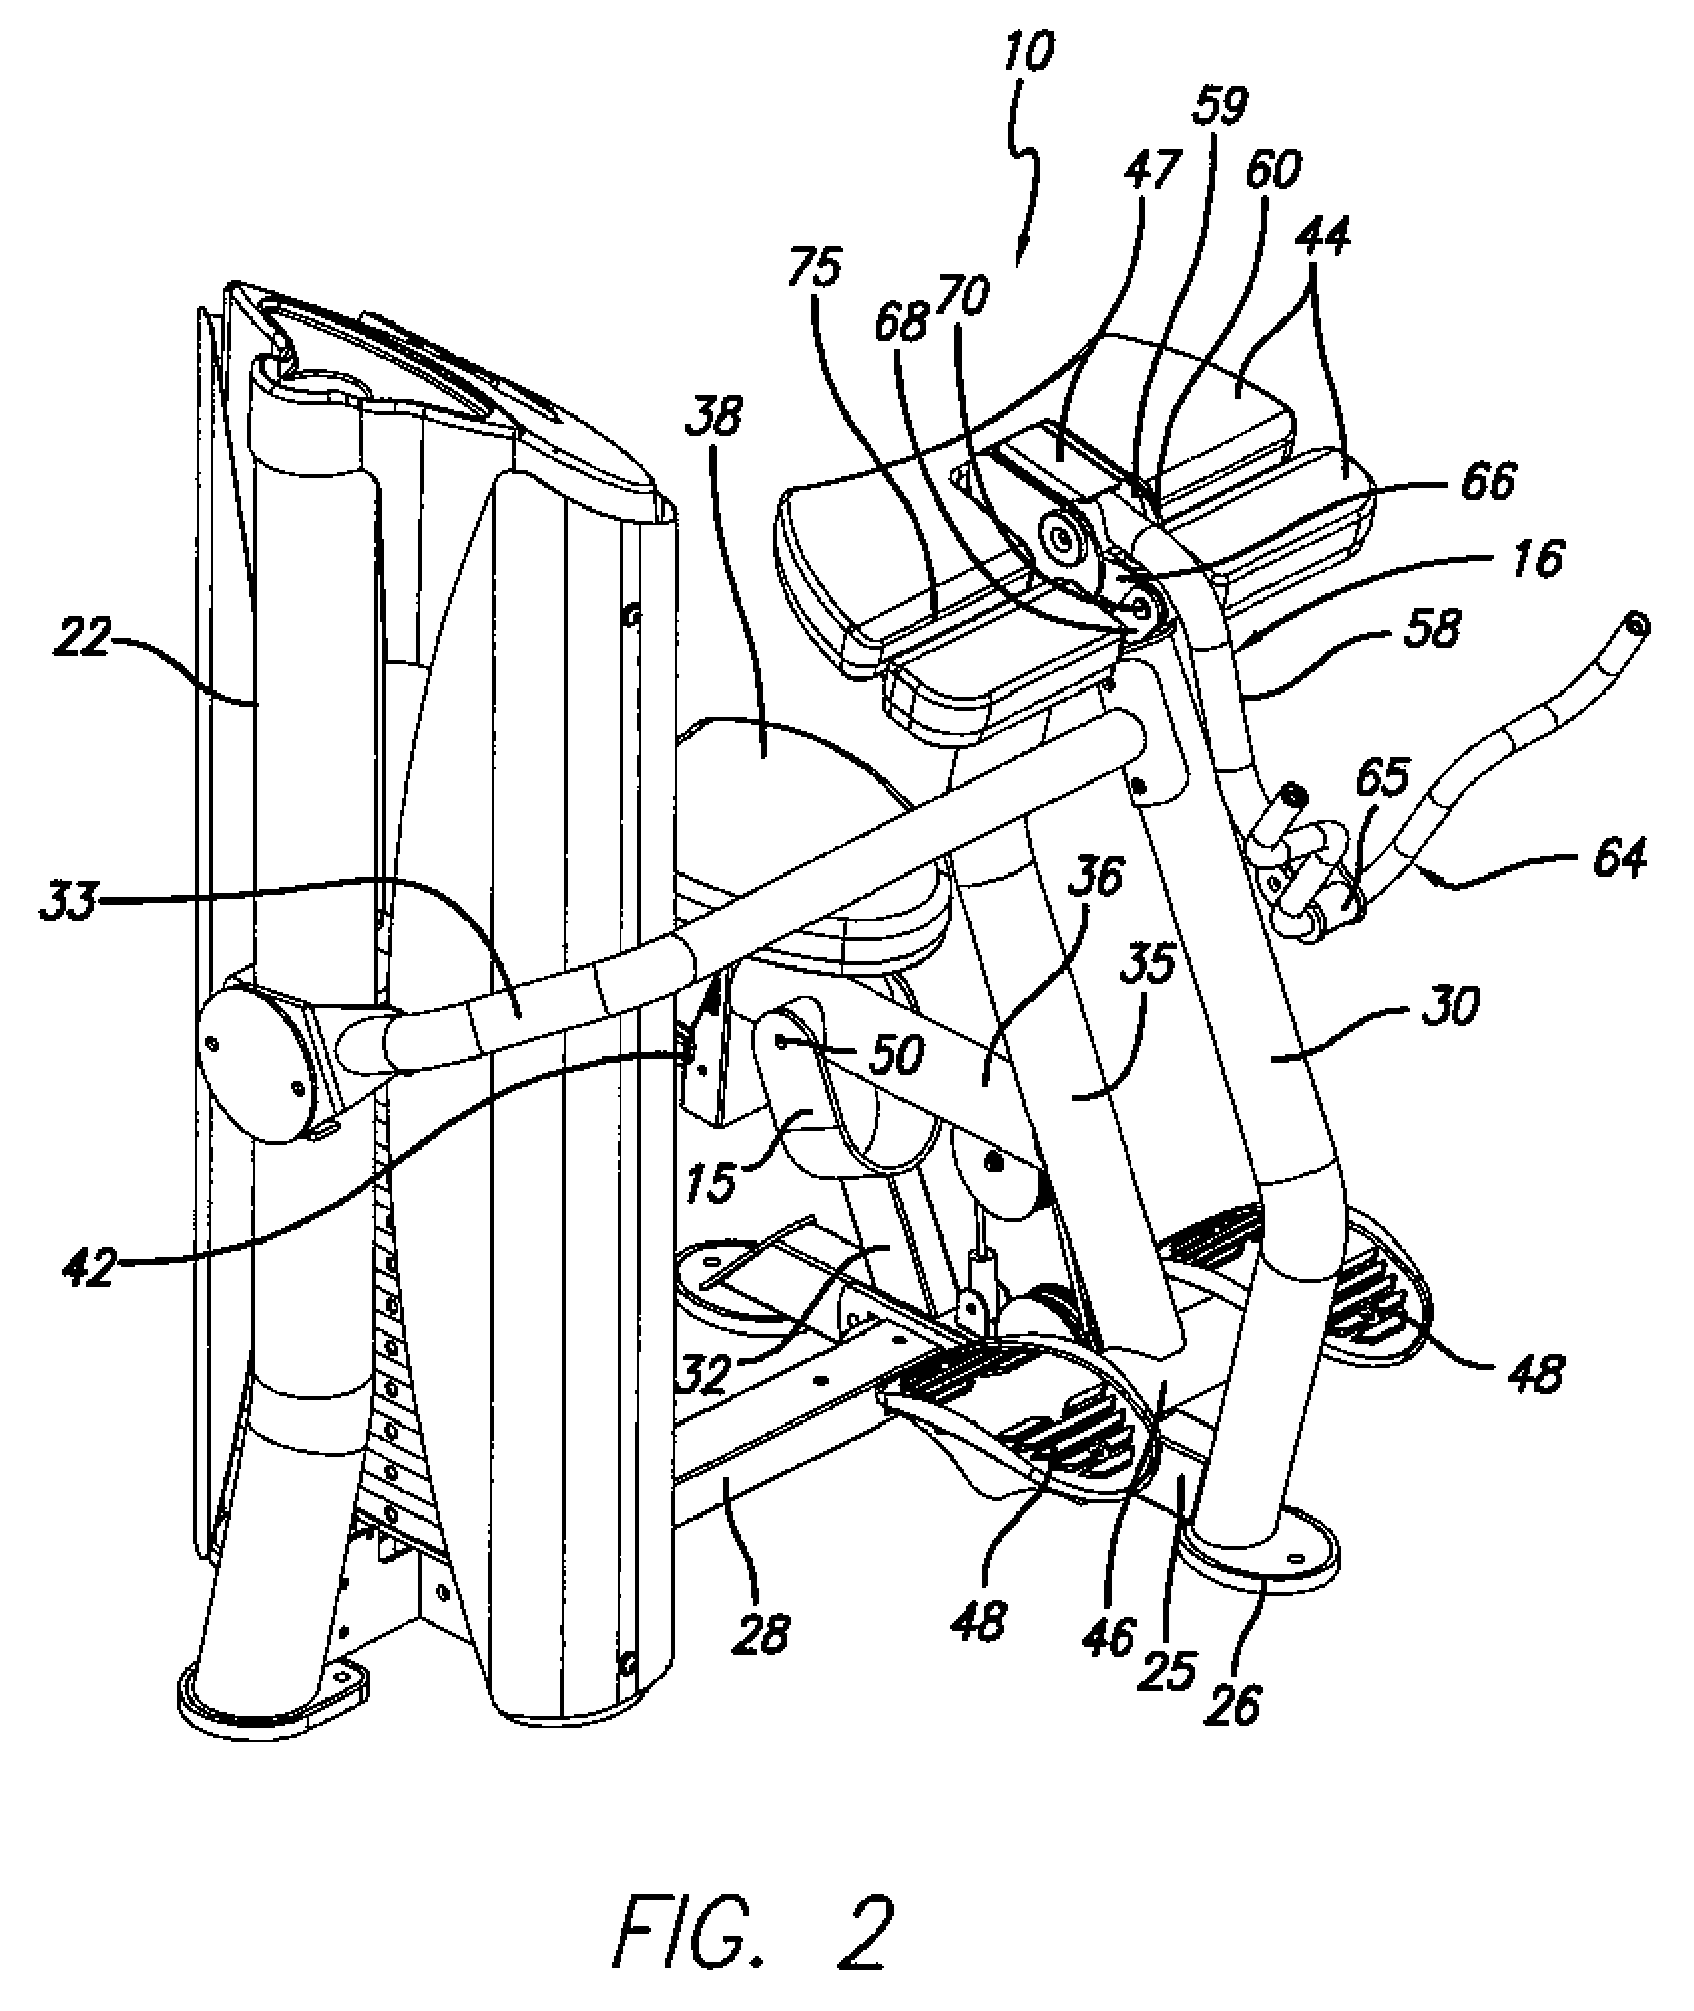 Arm Exercise Machine With Self-Aligning Pivoting User Support